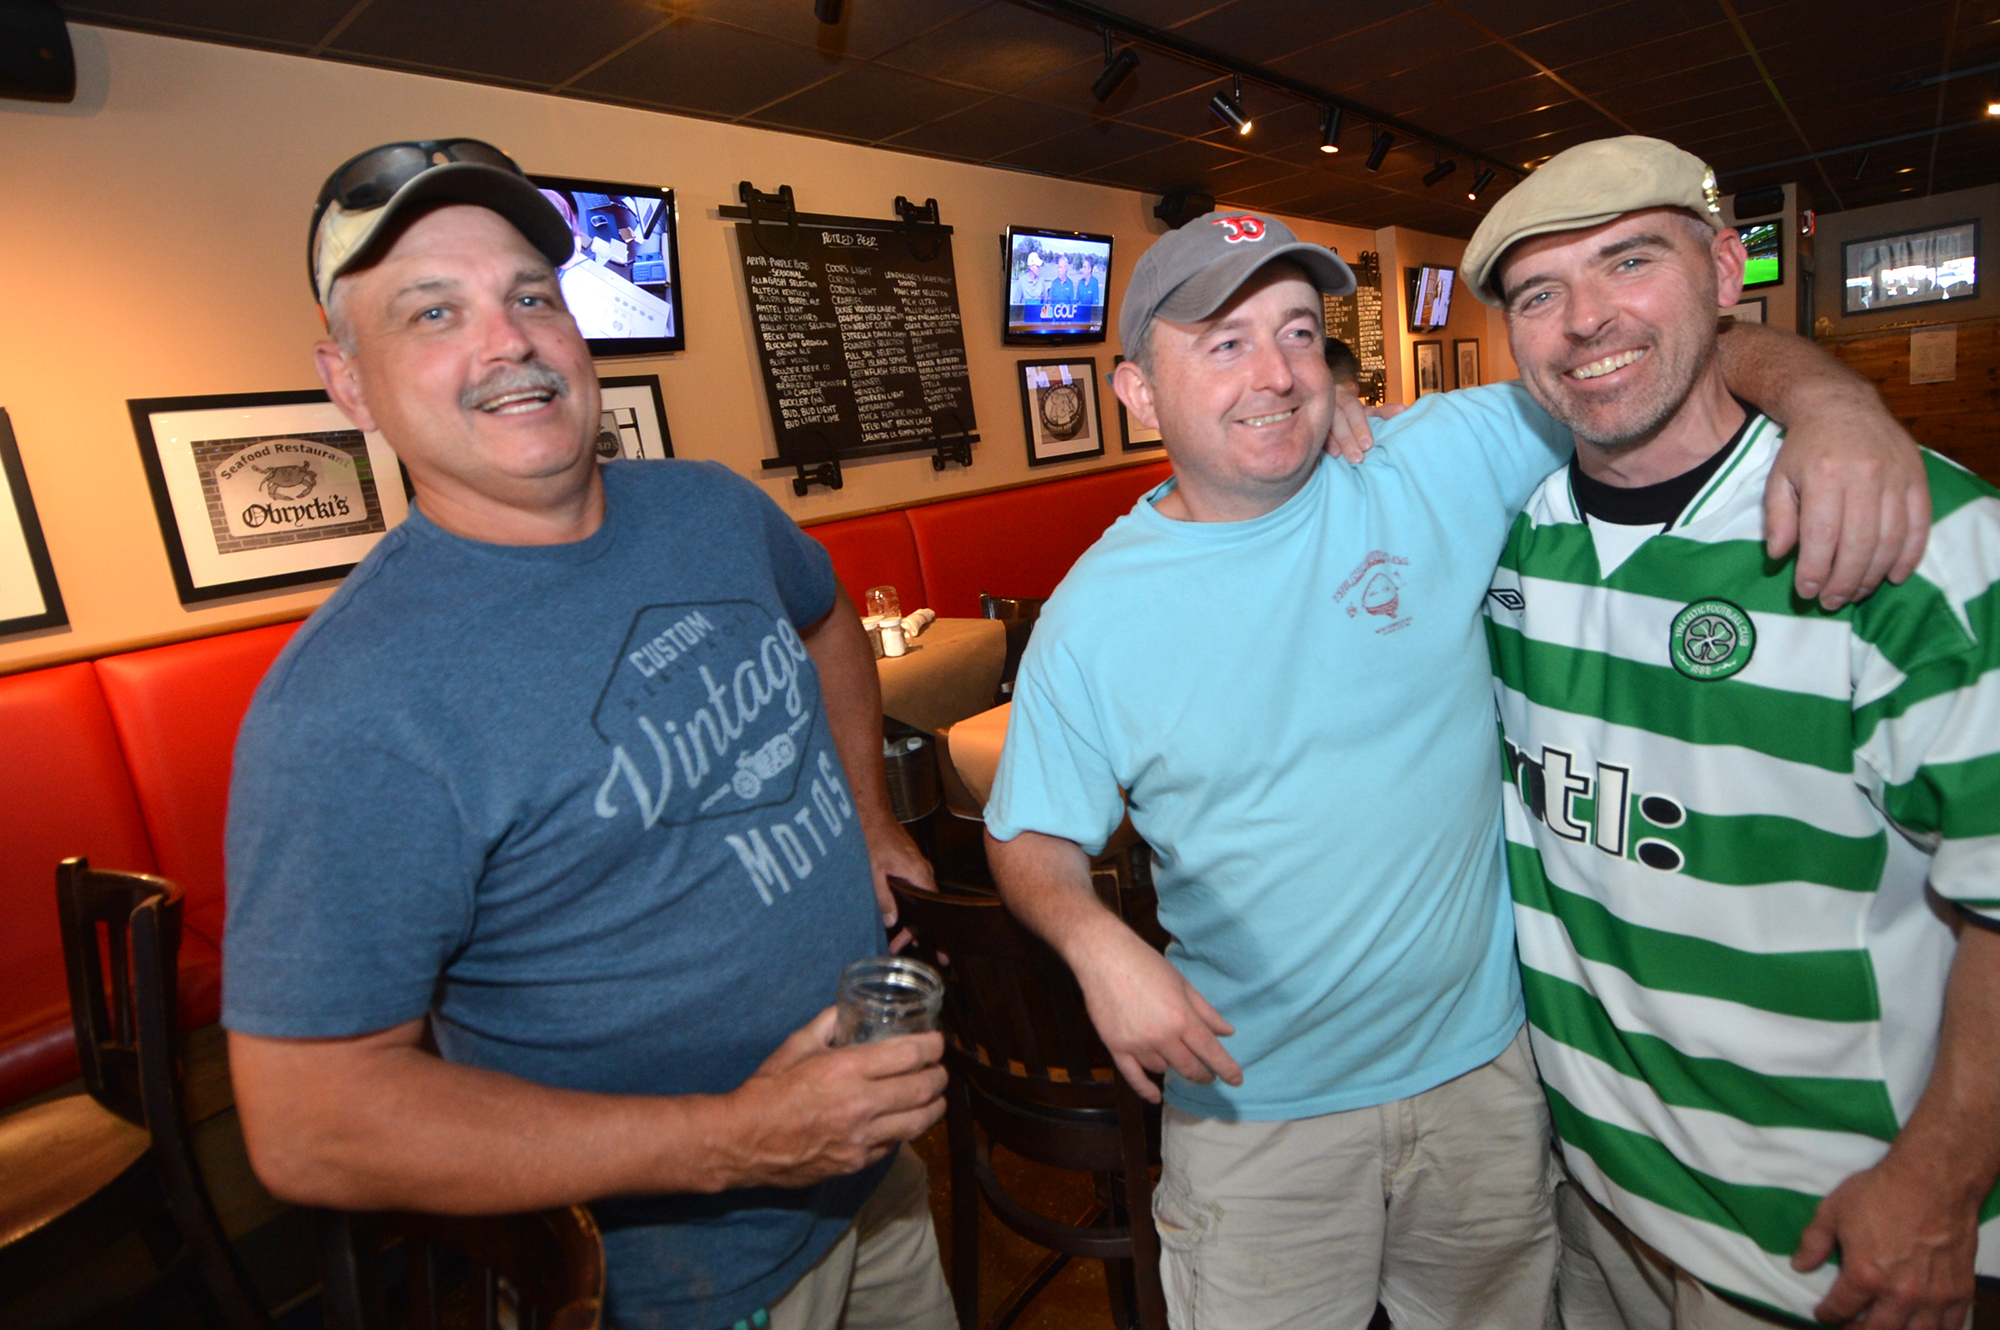 Mets, Yankees, Red Sox fans live harmoniously in Fairfield County